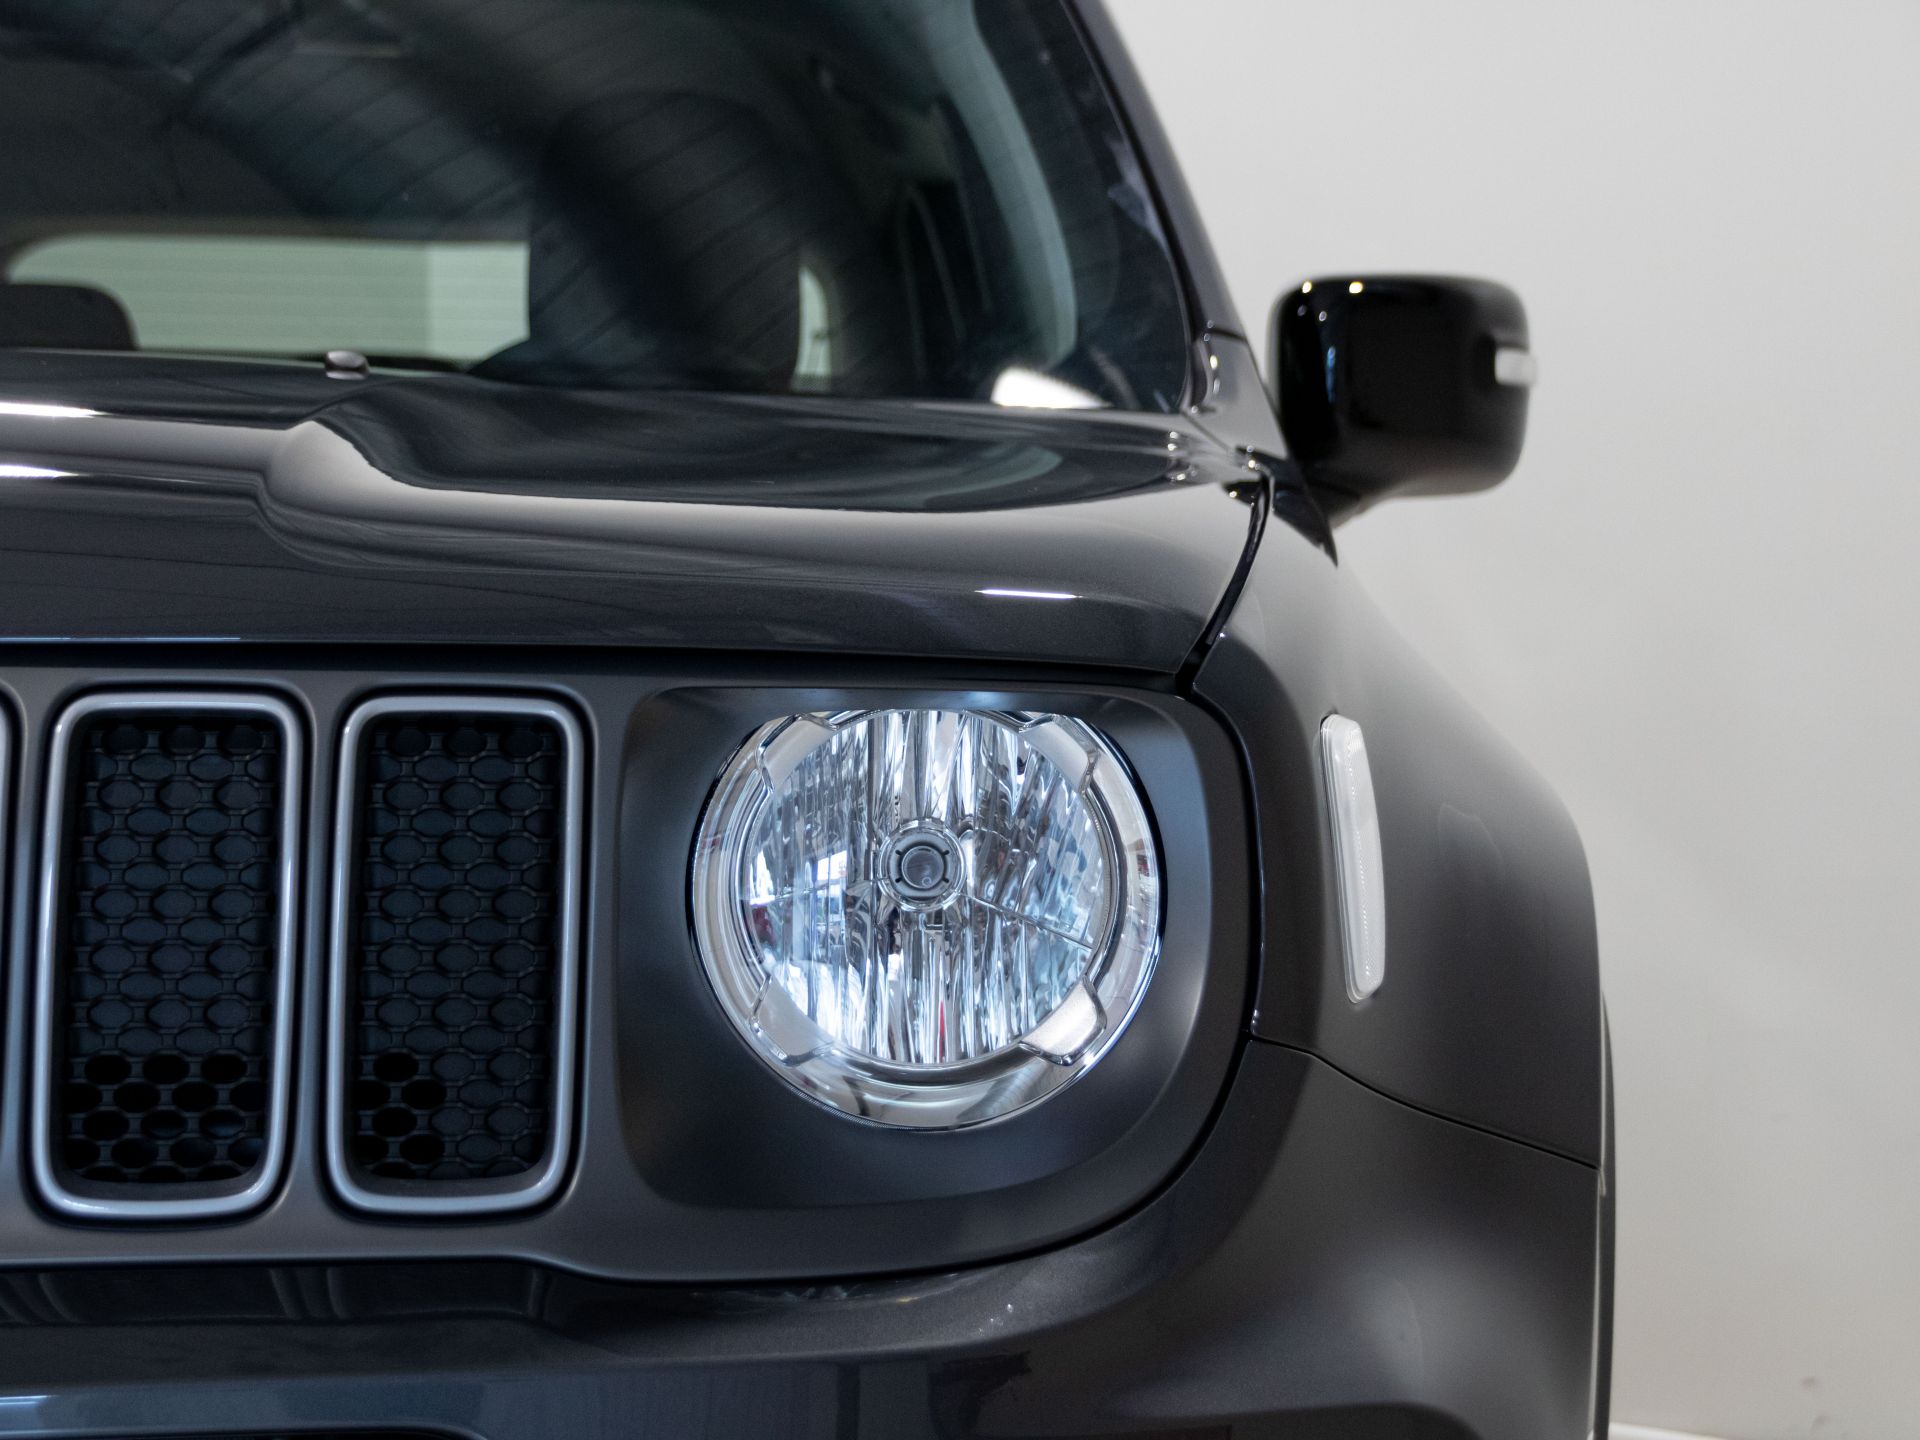 Jeep Renegade 4xe 1.3 PHEV 140 kW(190CV) Limited AT